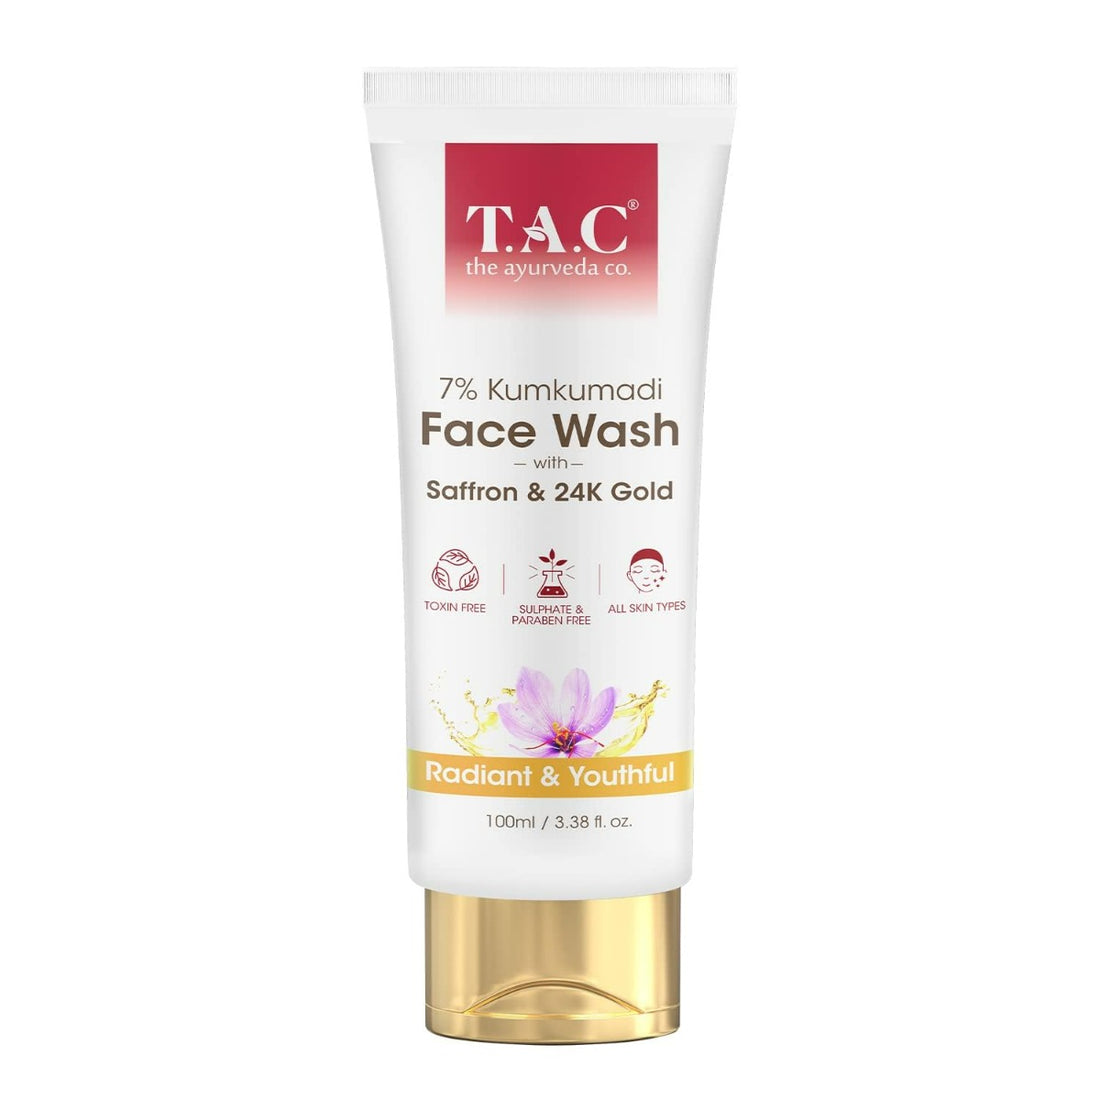 TAC - The Ayurveda Co. 7% Kumkumadi Face Wash with 24k Gold Dust (100ml)